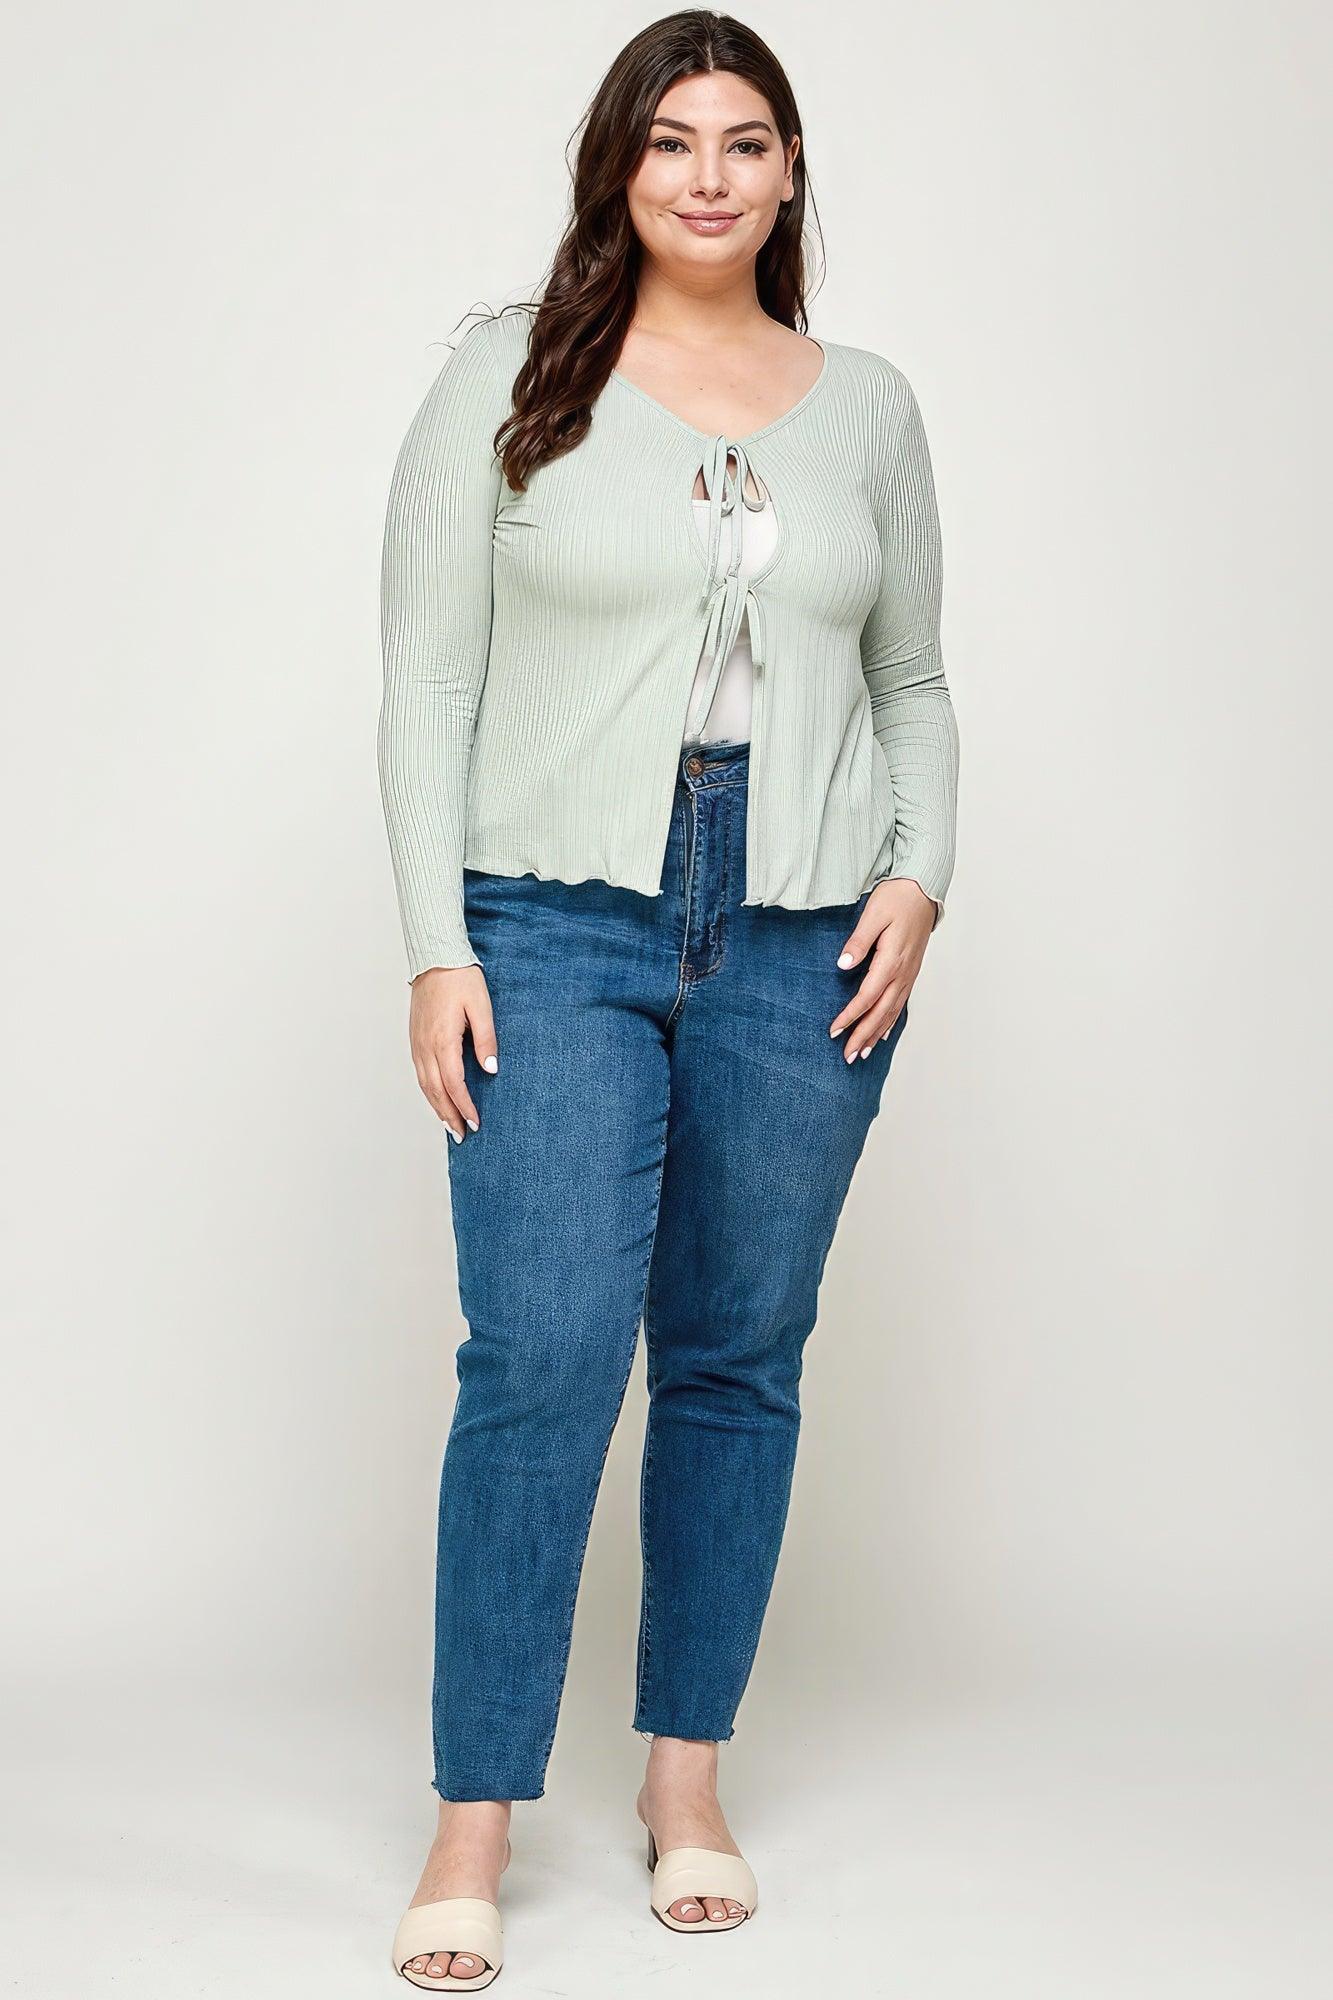 Women's Sweaters - Cardigans Solid Ribbed Pointelle Cardigan